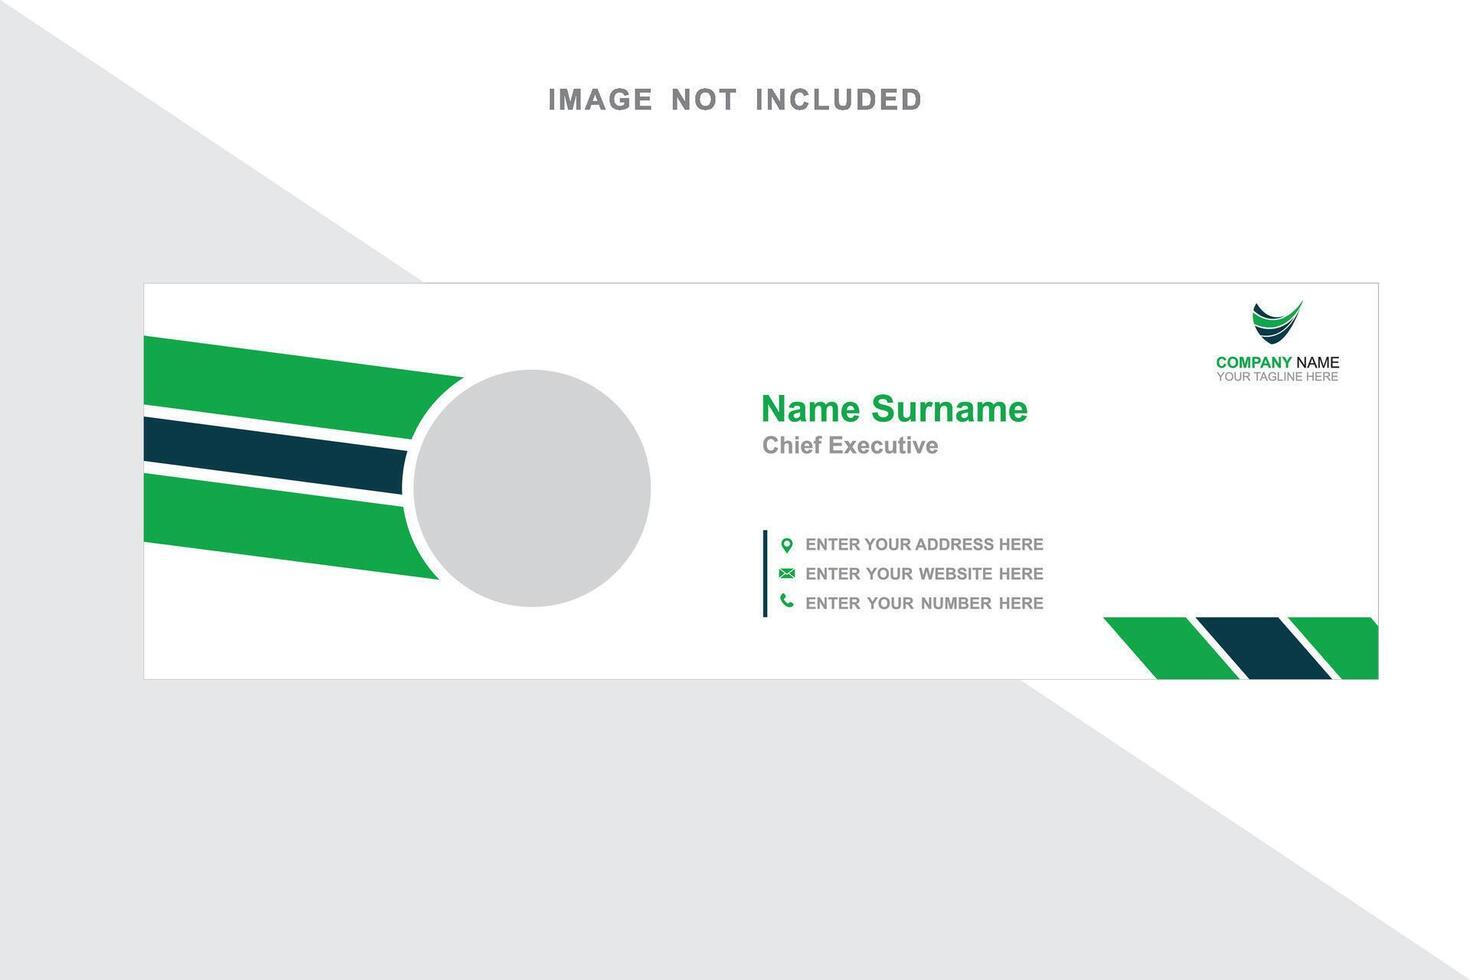 Green combination Vector abstract design banner web template fully editable Eps 10 file